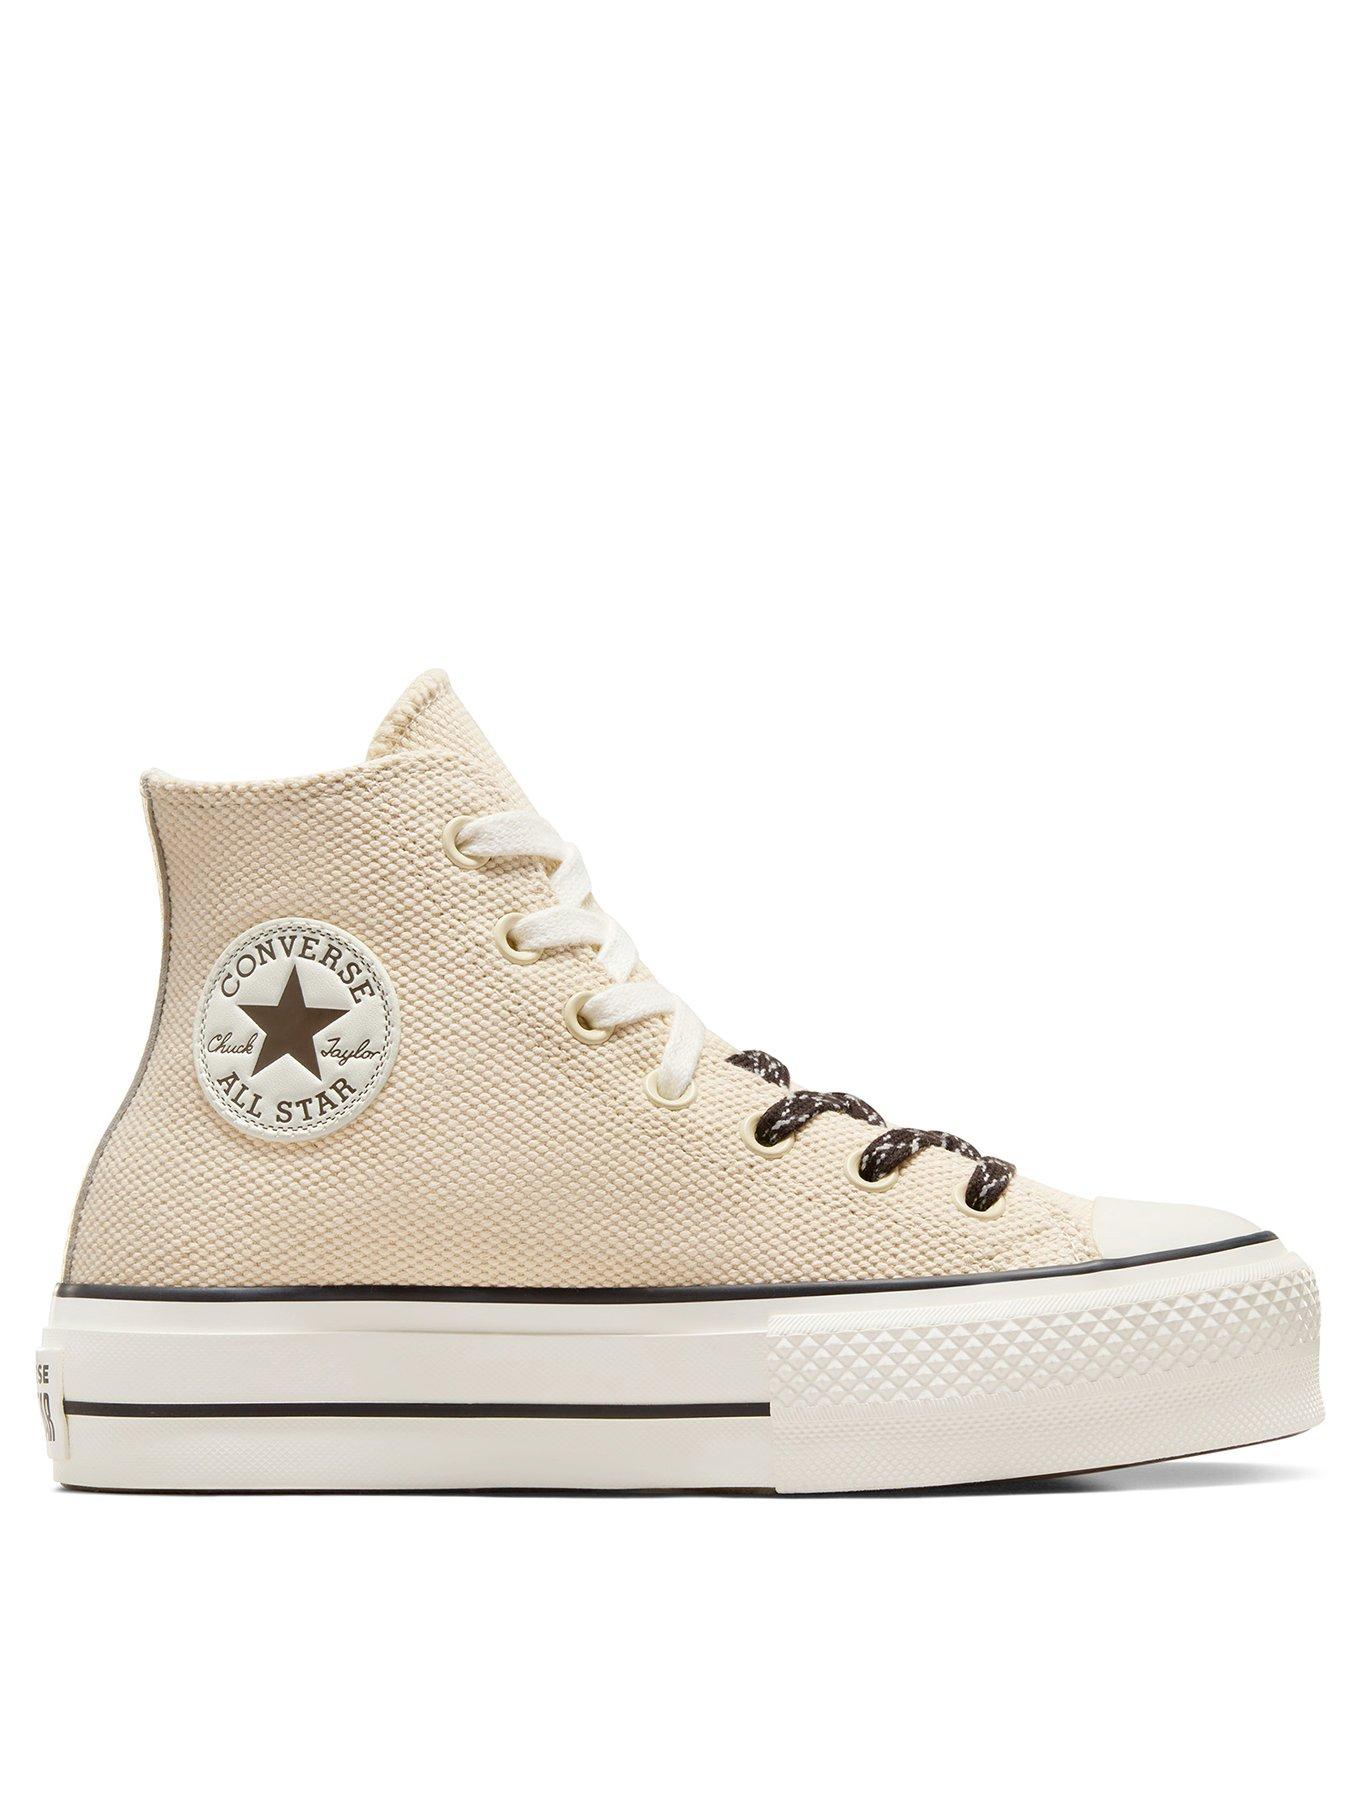 Converse Womens Lift Hi Top Trainers - Off White